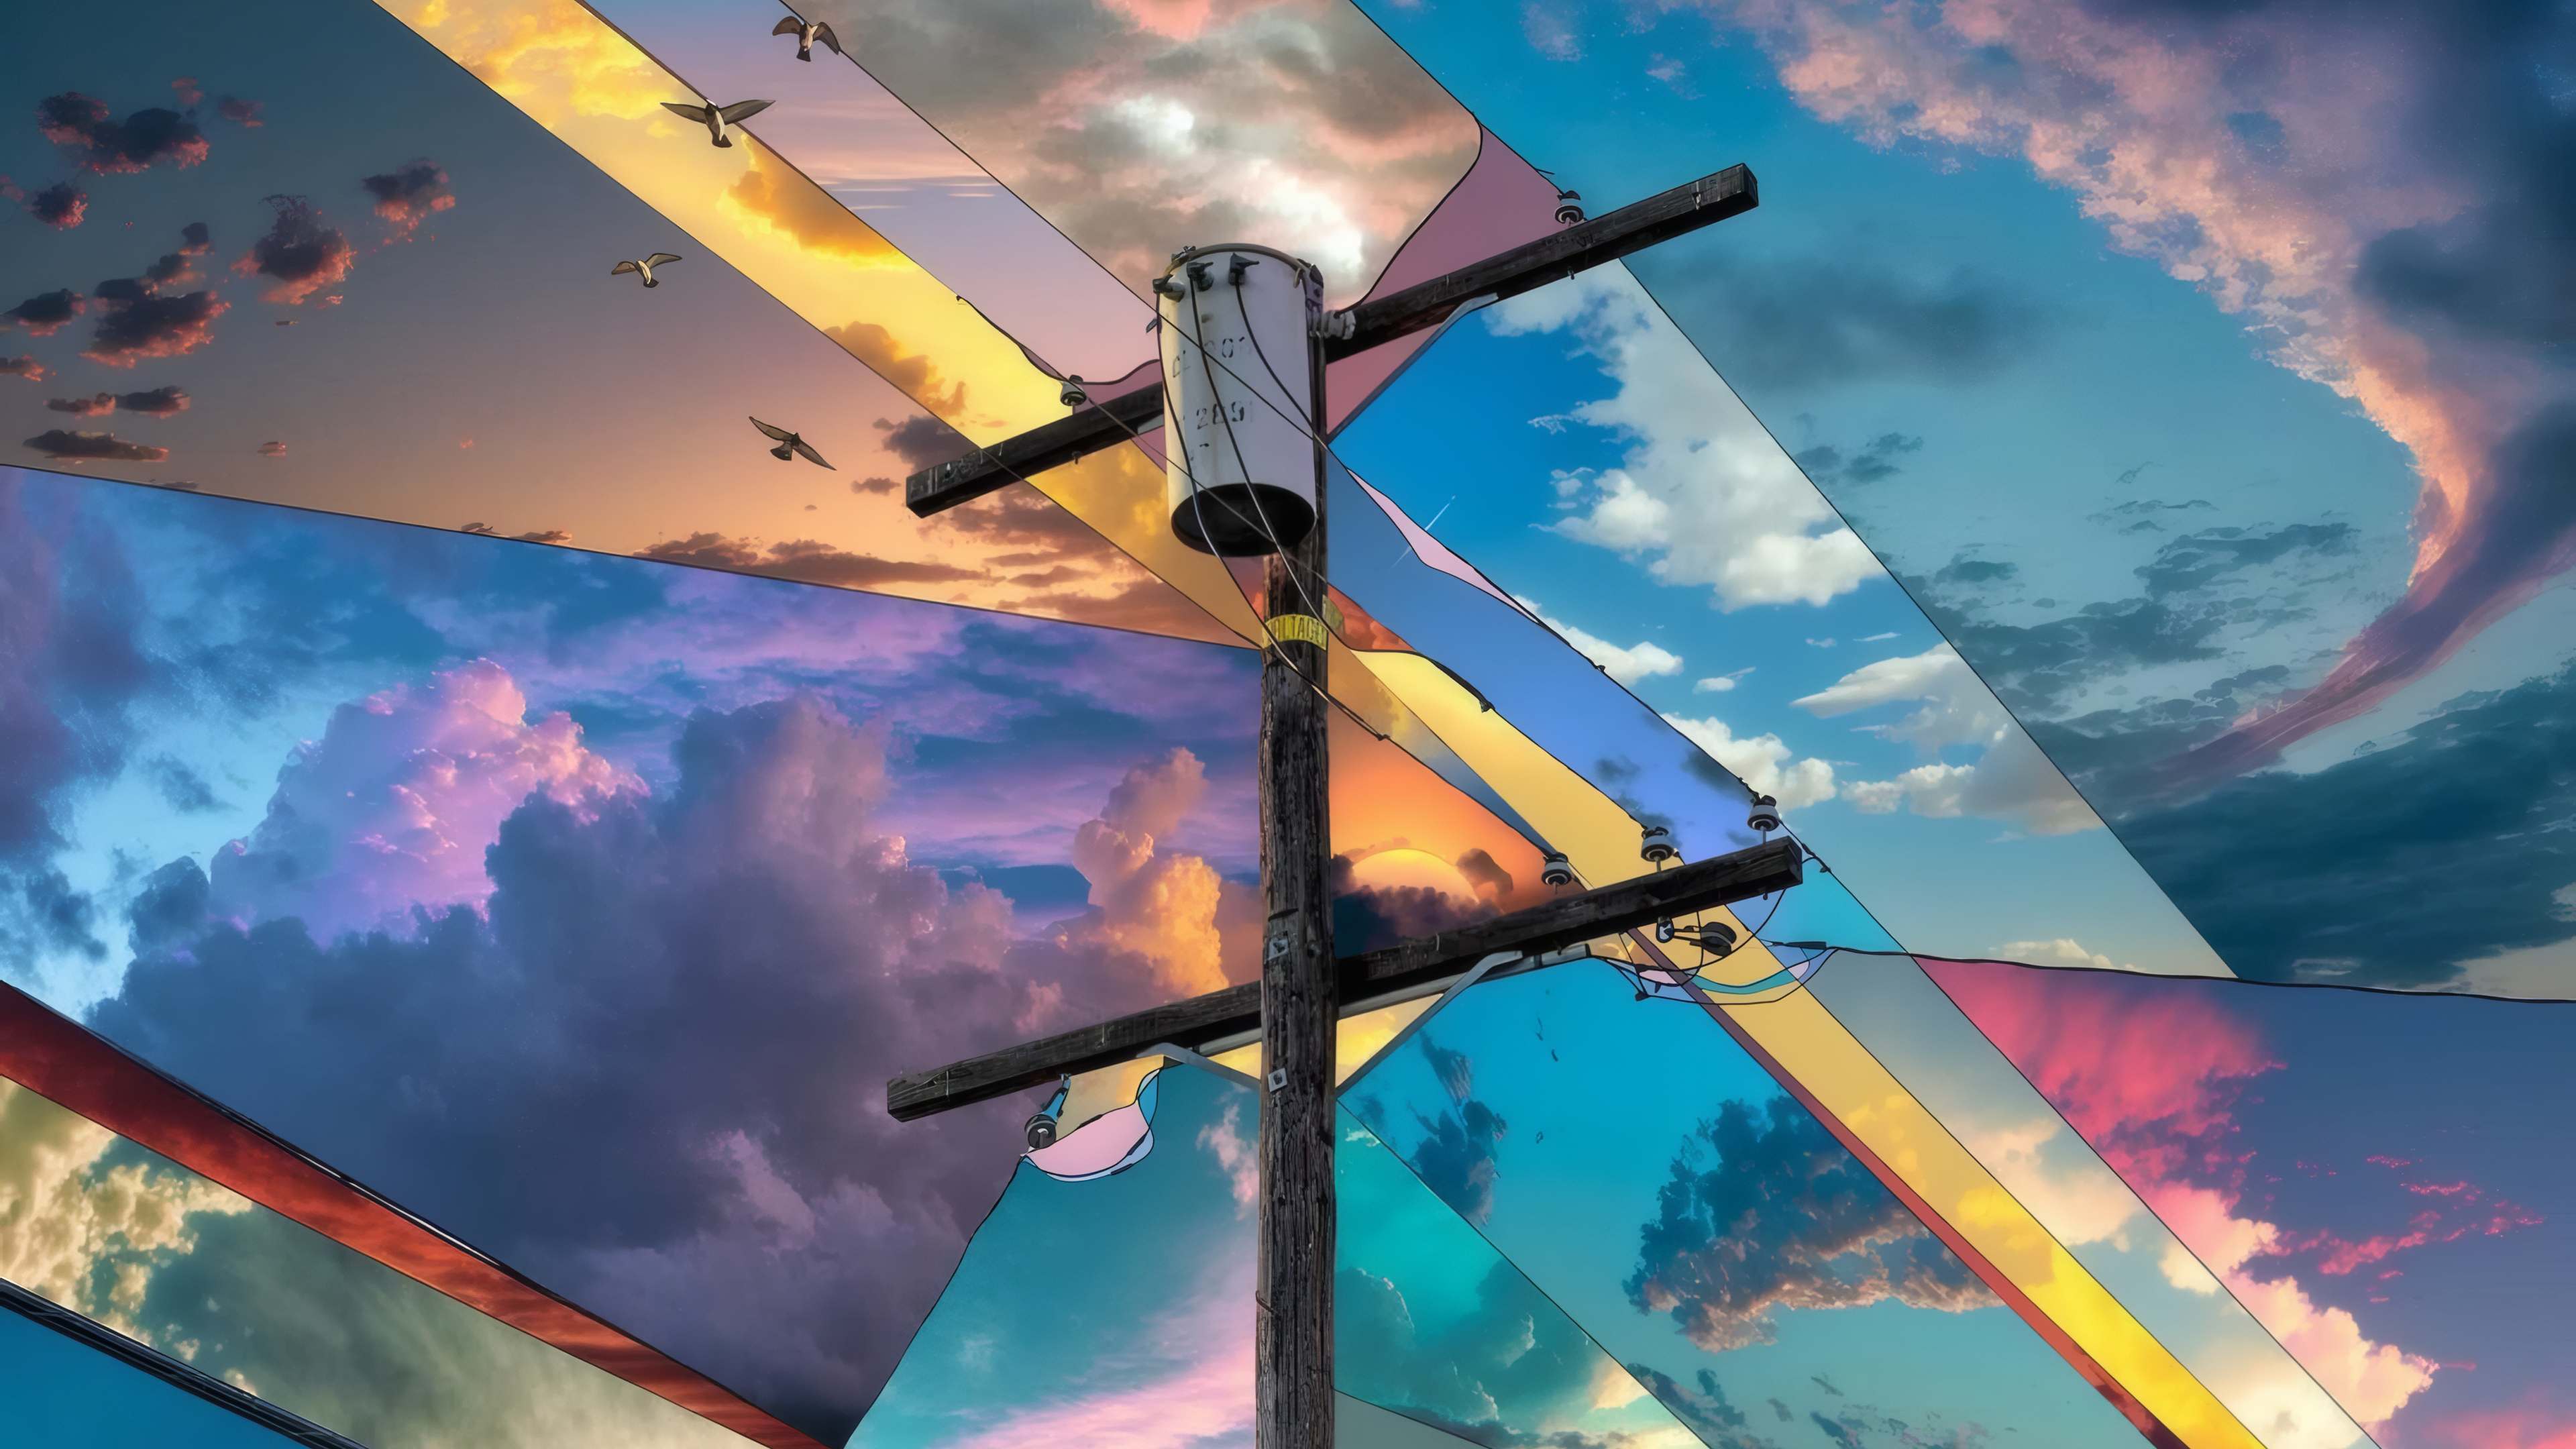 Photography Collage Utility Pole Alex Hyner Cropped 3840x2160